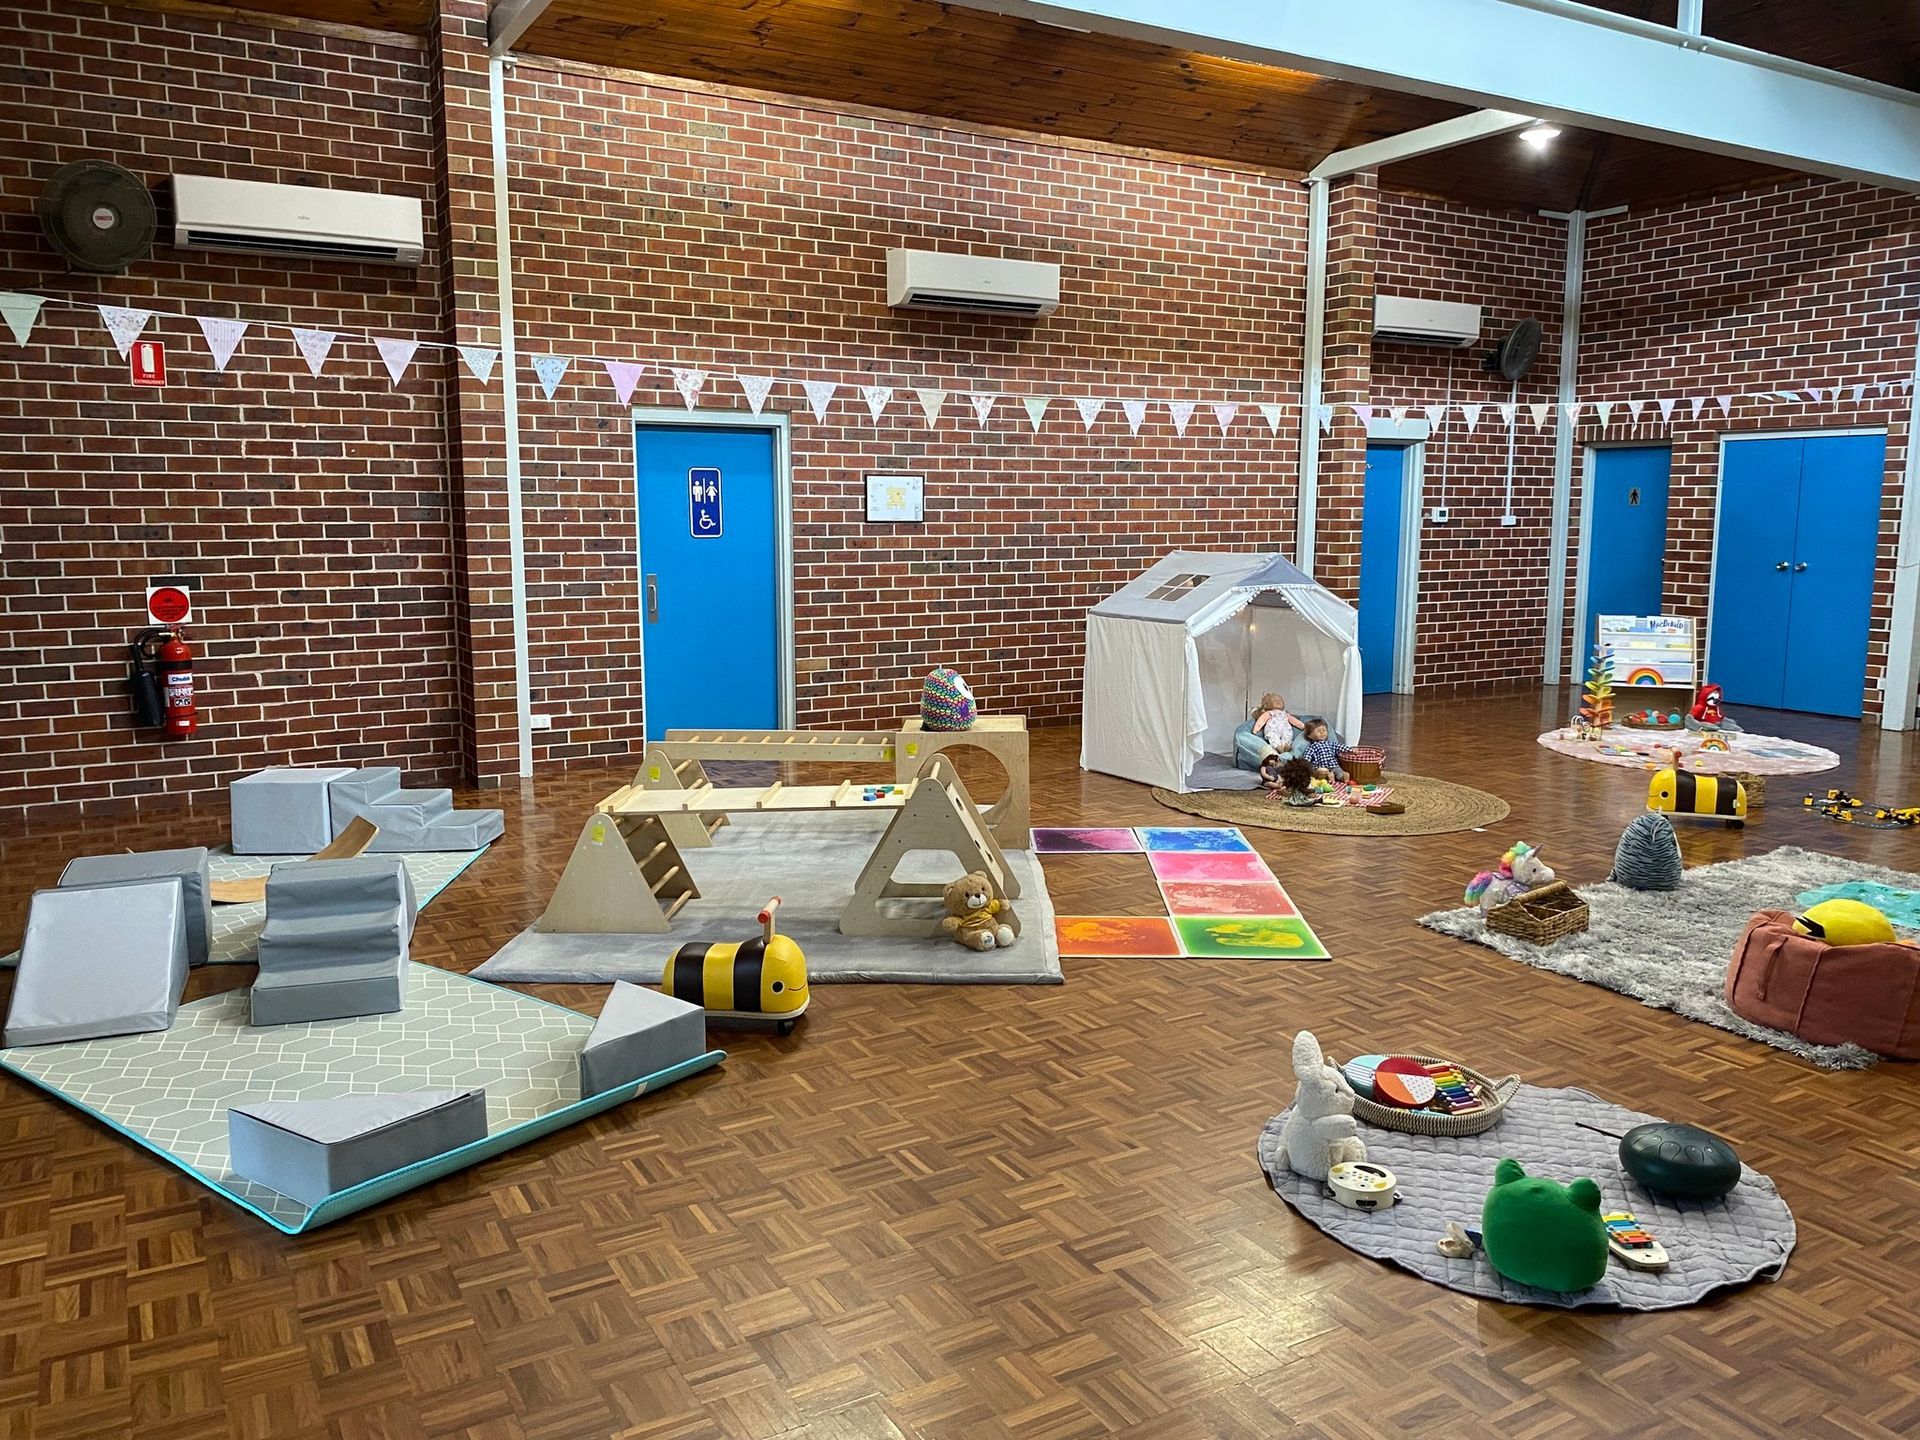 Children's play room with building blocks — The Happy Human Hub